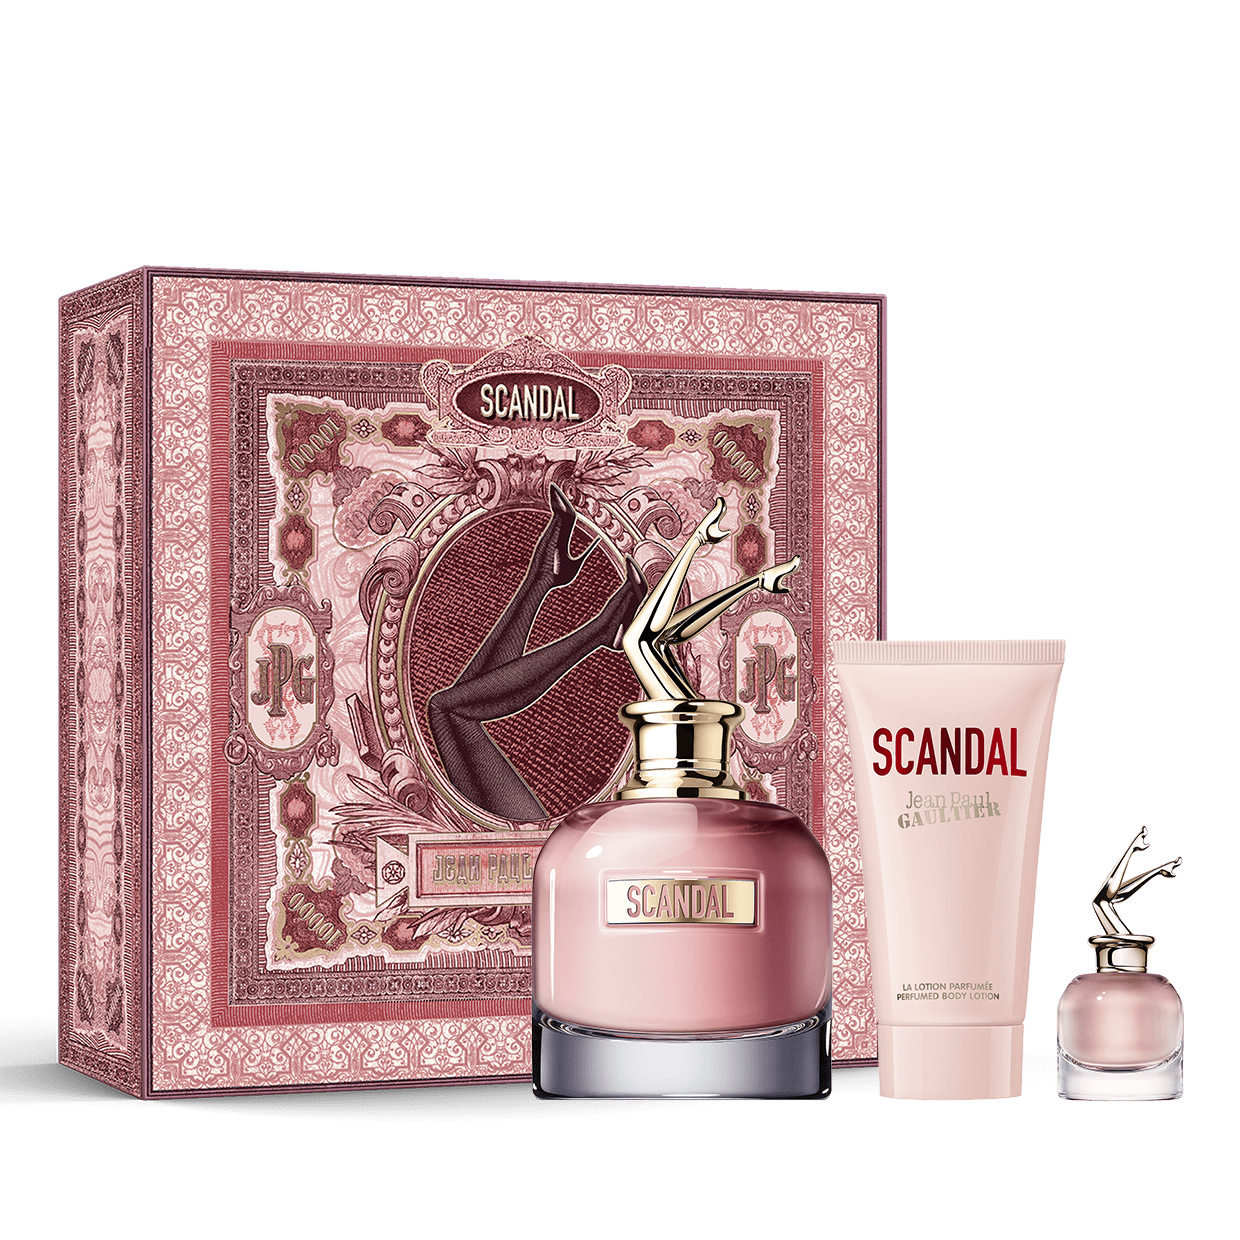 Scandal 80 ml, Body lotion 75 ml and Miniature